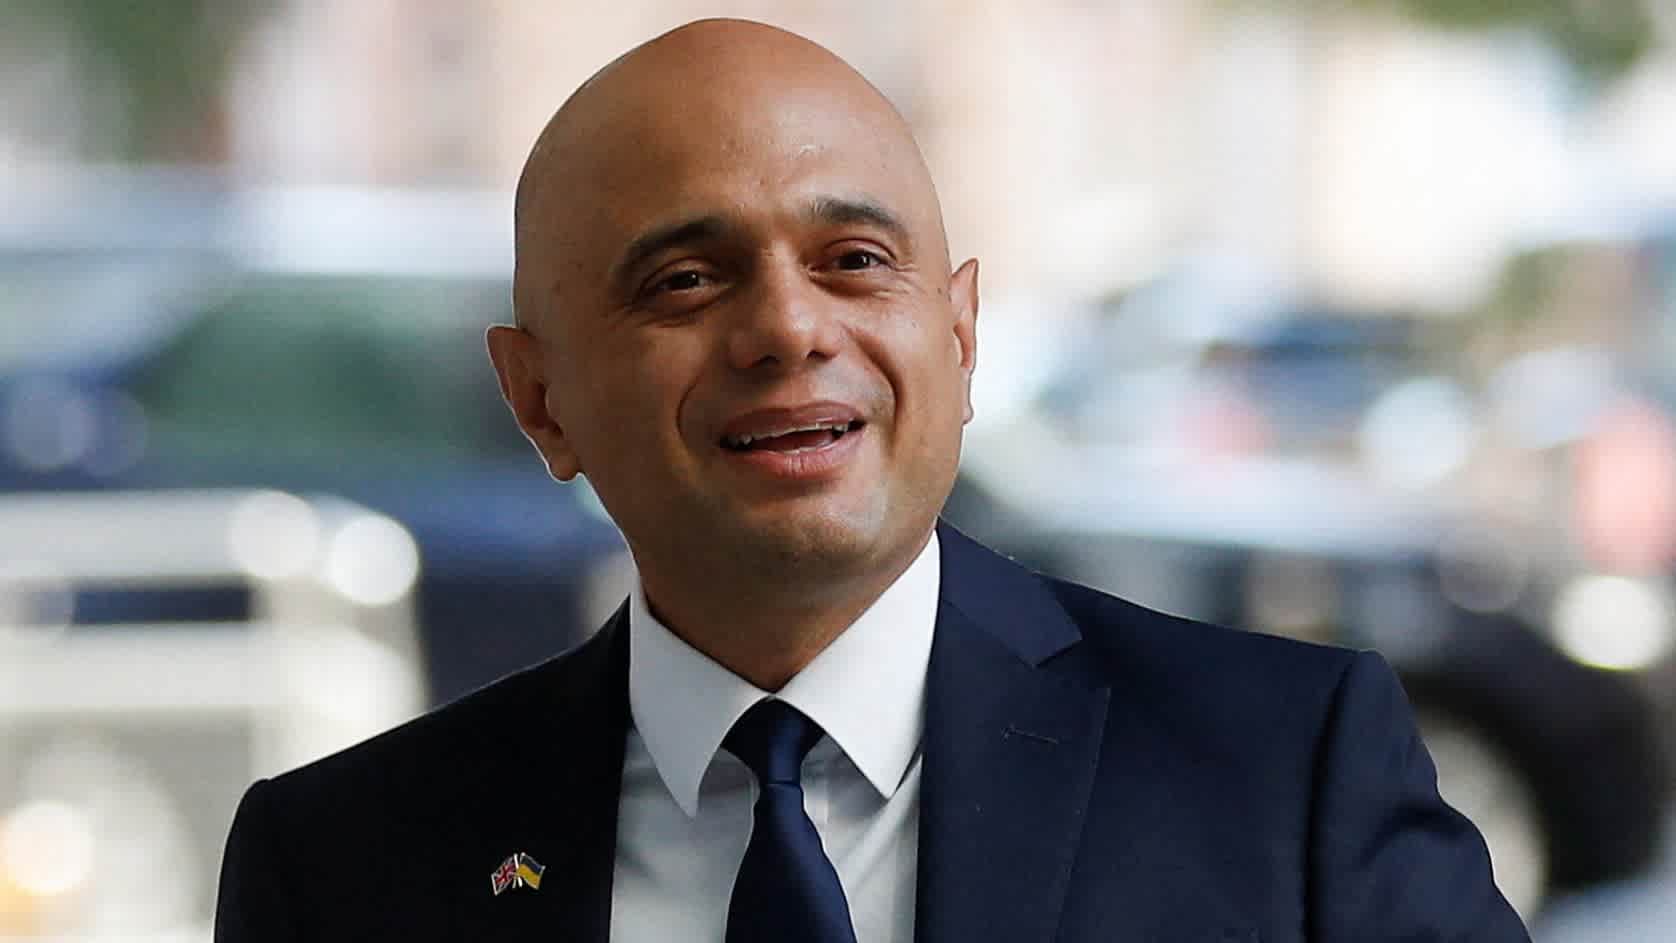 Javid held talks with Pimco about career after politics